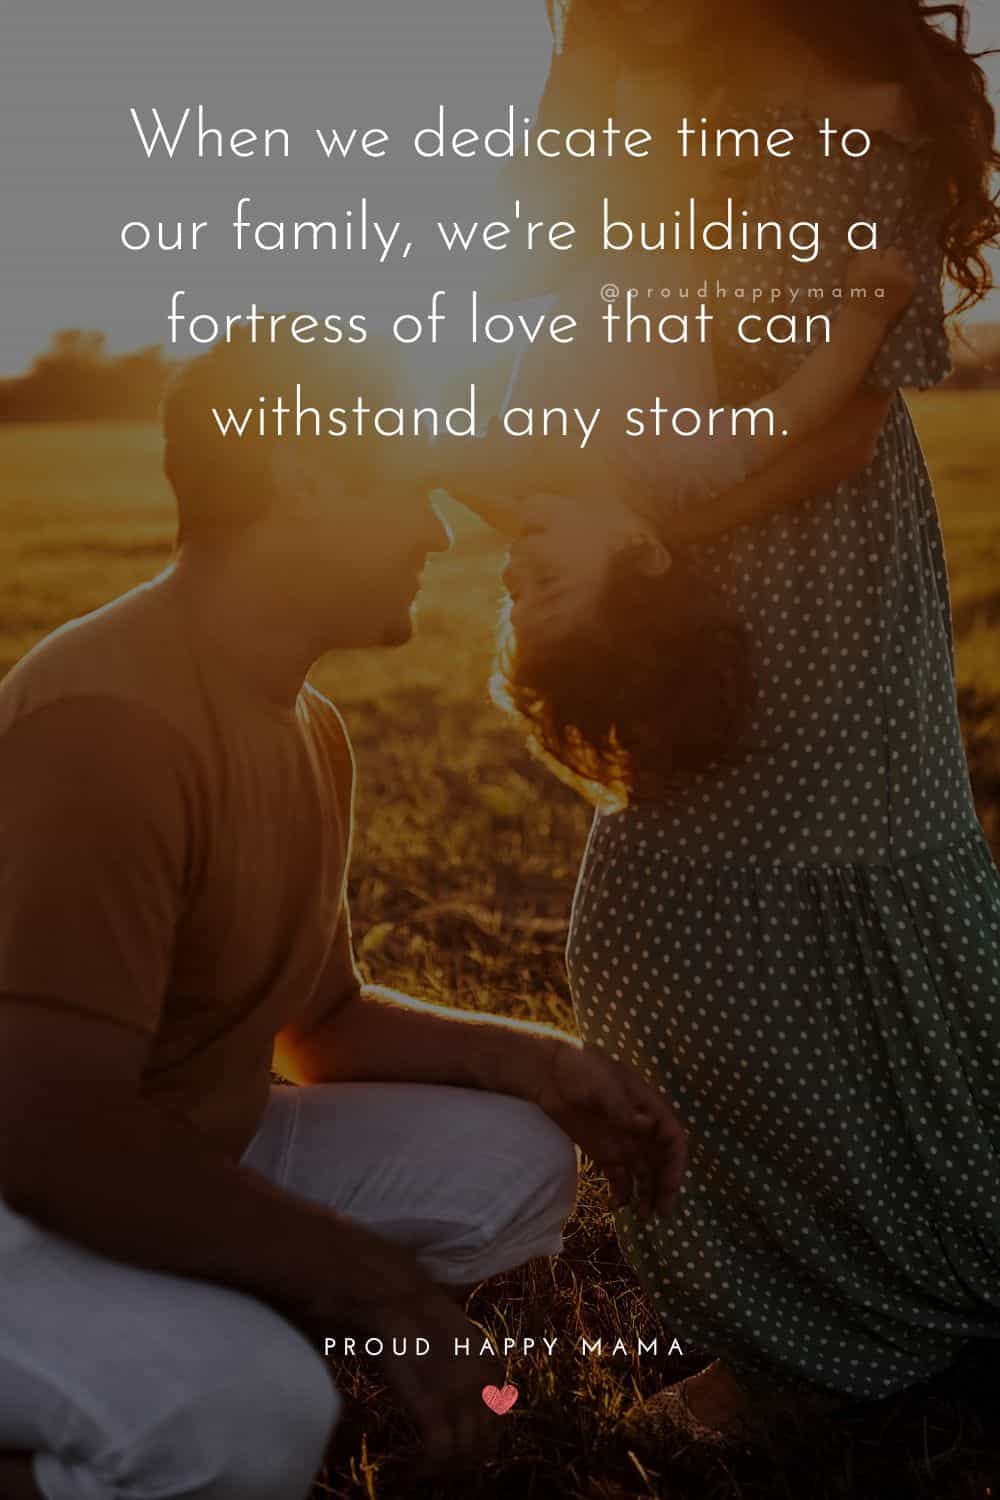 time with family quotes - When we dedicate time to our family, we're building a fortress of love that can withstand any storm.